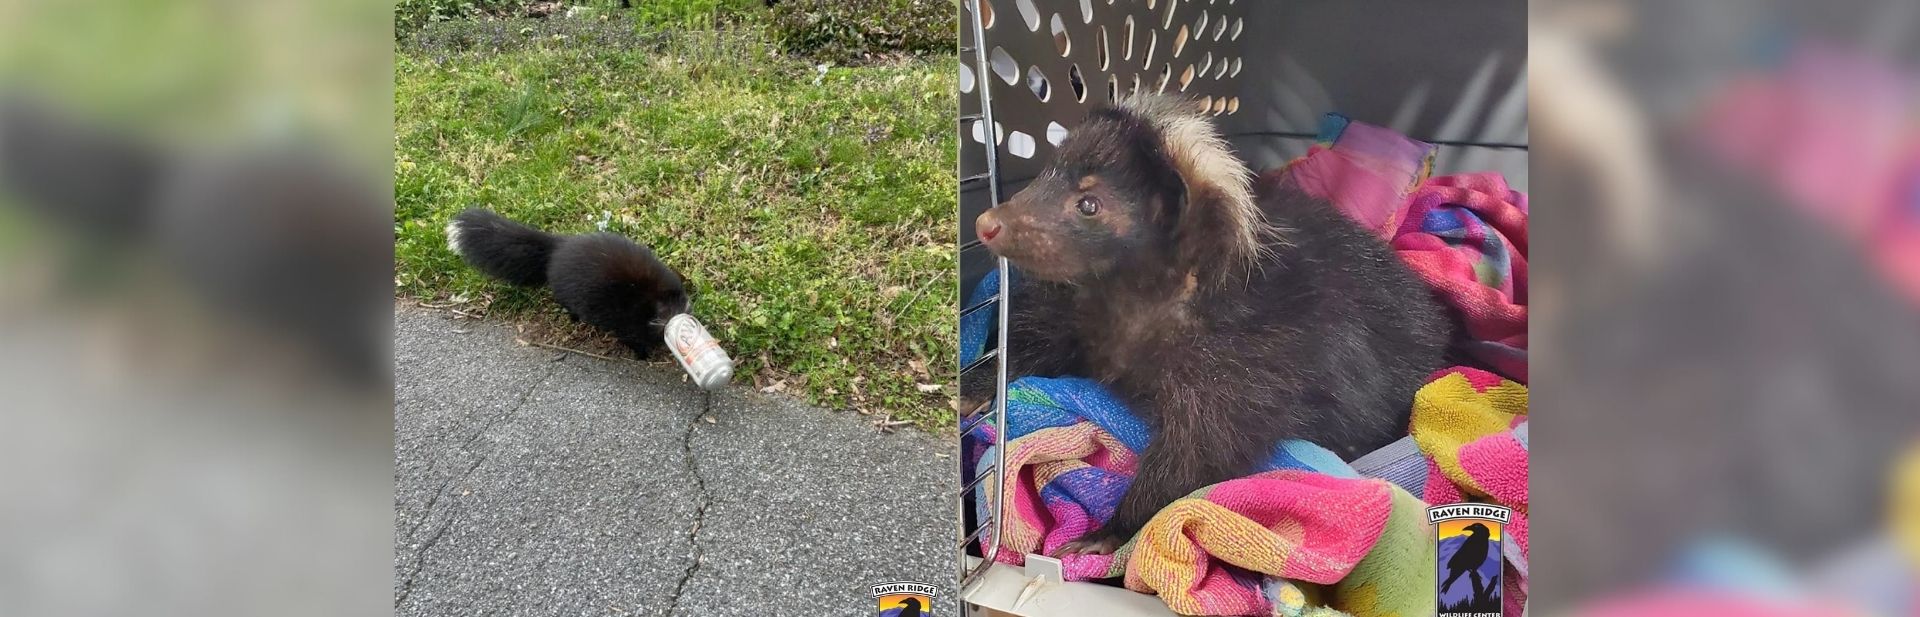 Distressed Skunk with Head Stuck in a Can Sparks Kindhearted Team Rescue Effort